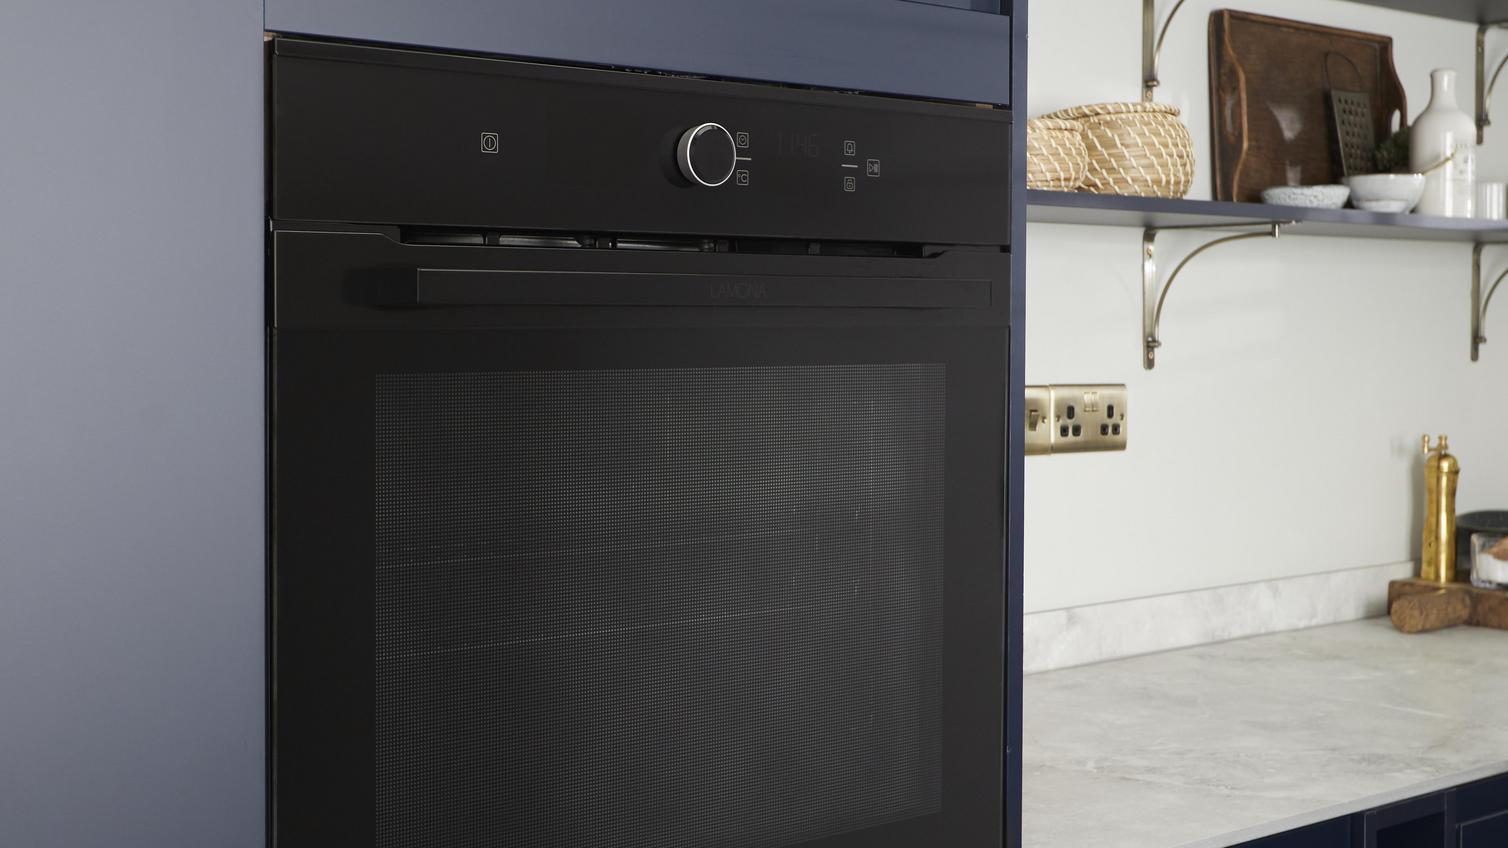 An integrated, black Lamona oven which is built into an appliance cabinet at eye-level. It is alongside navy kitchen doors.